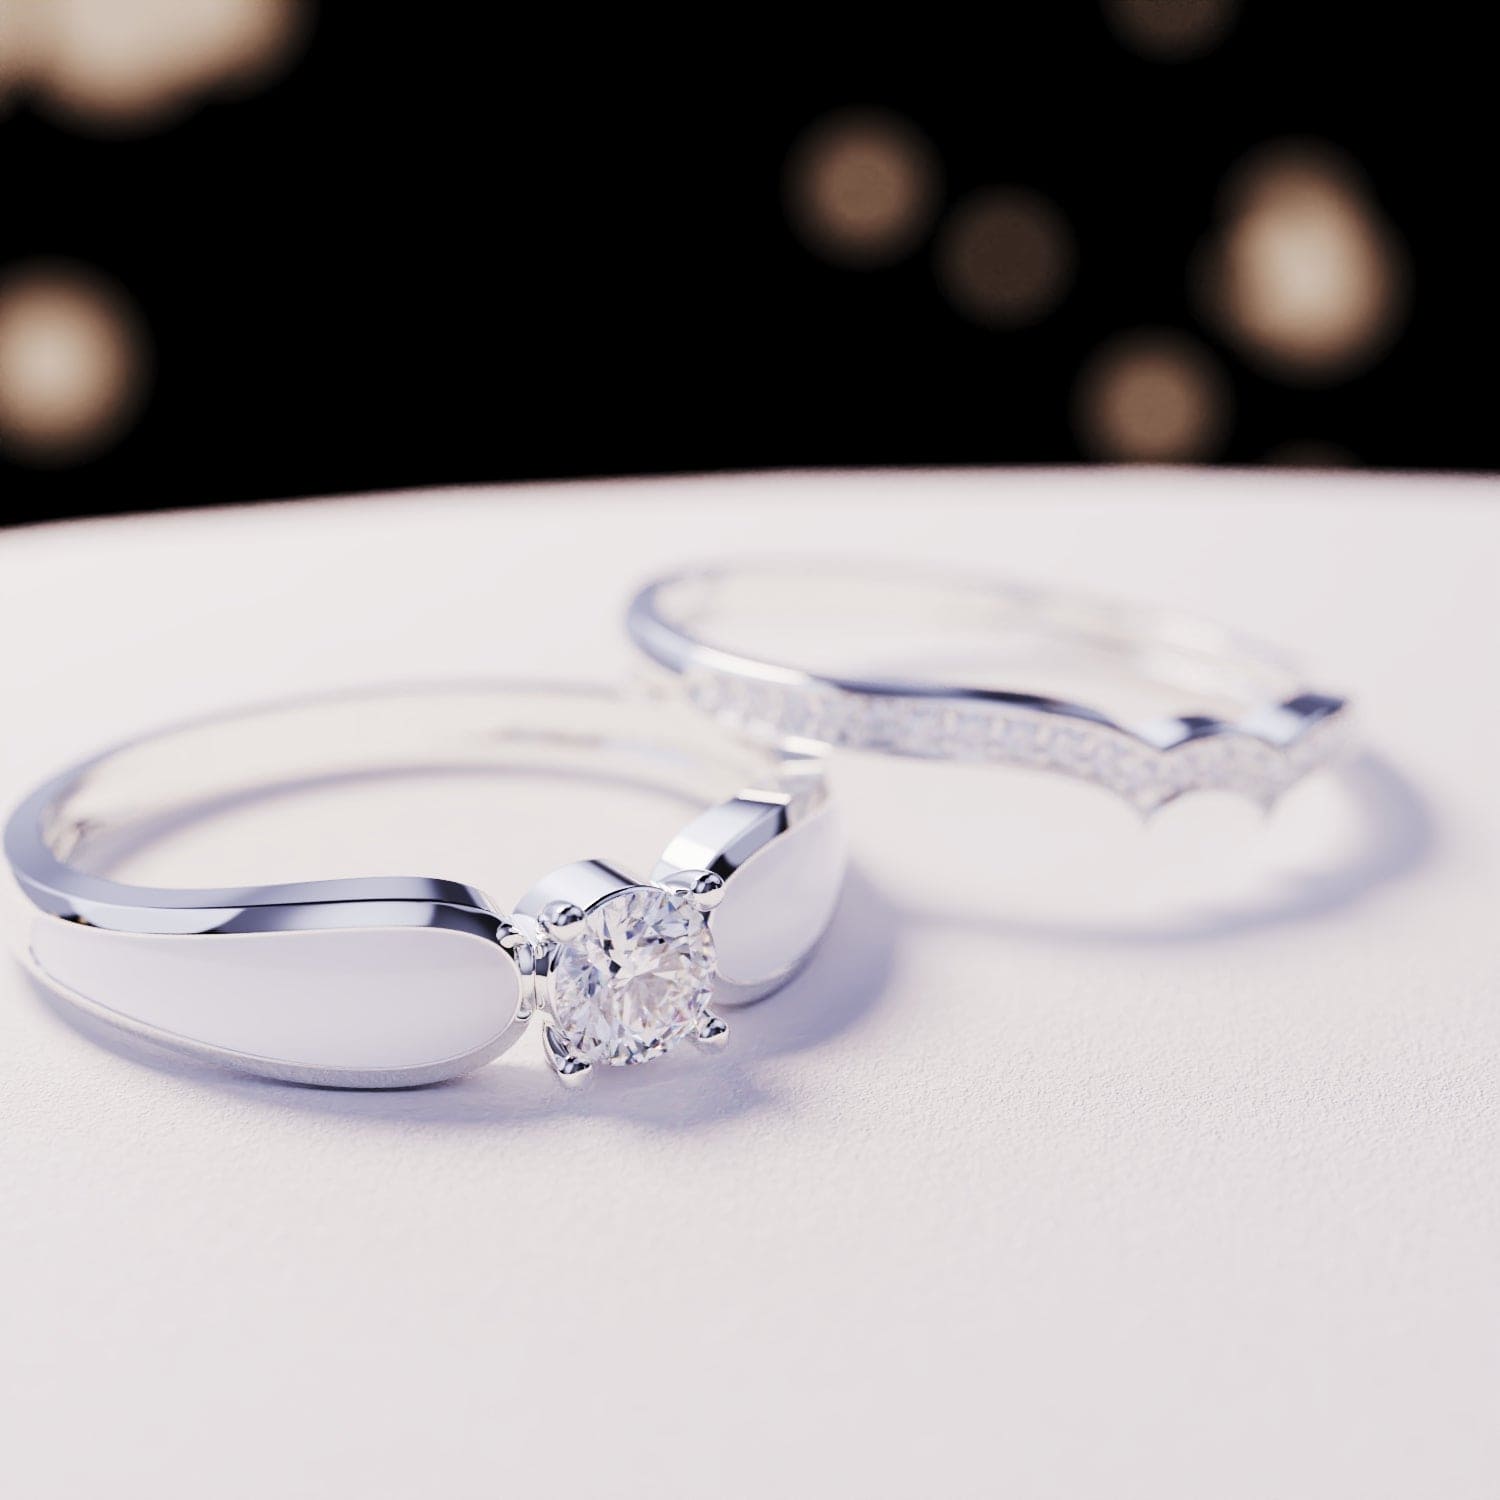 Snow Lagoon: 2 Piece Set Ring - S925 Sterling Silver